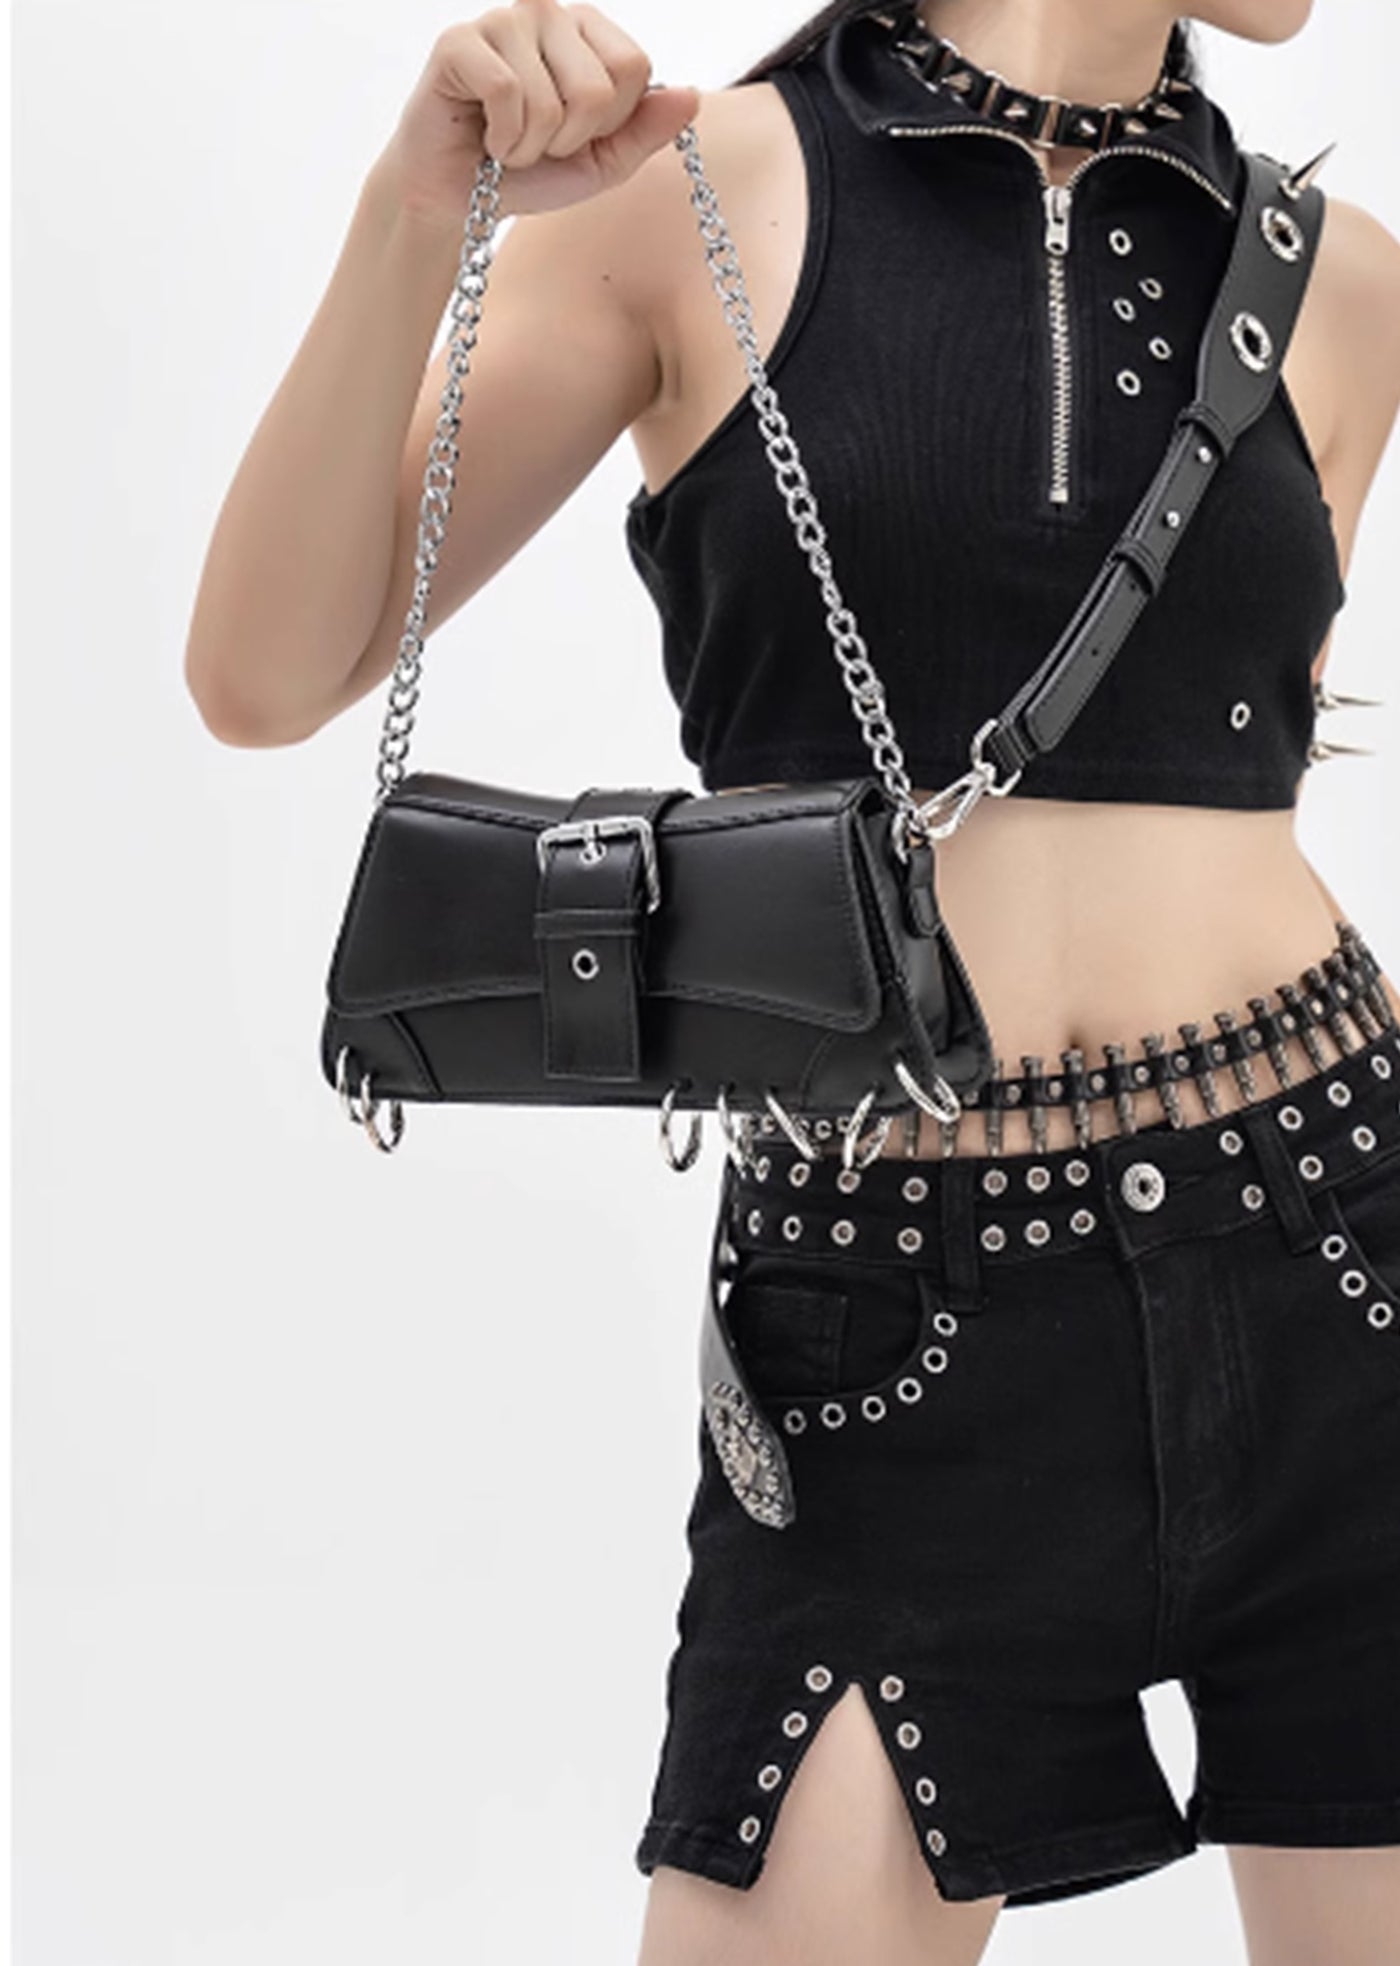 【Antiphase】Subculture silver square small silhouette black bag  AP0004